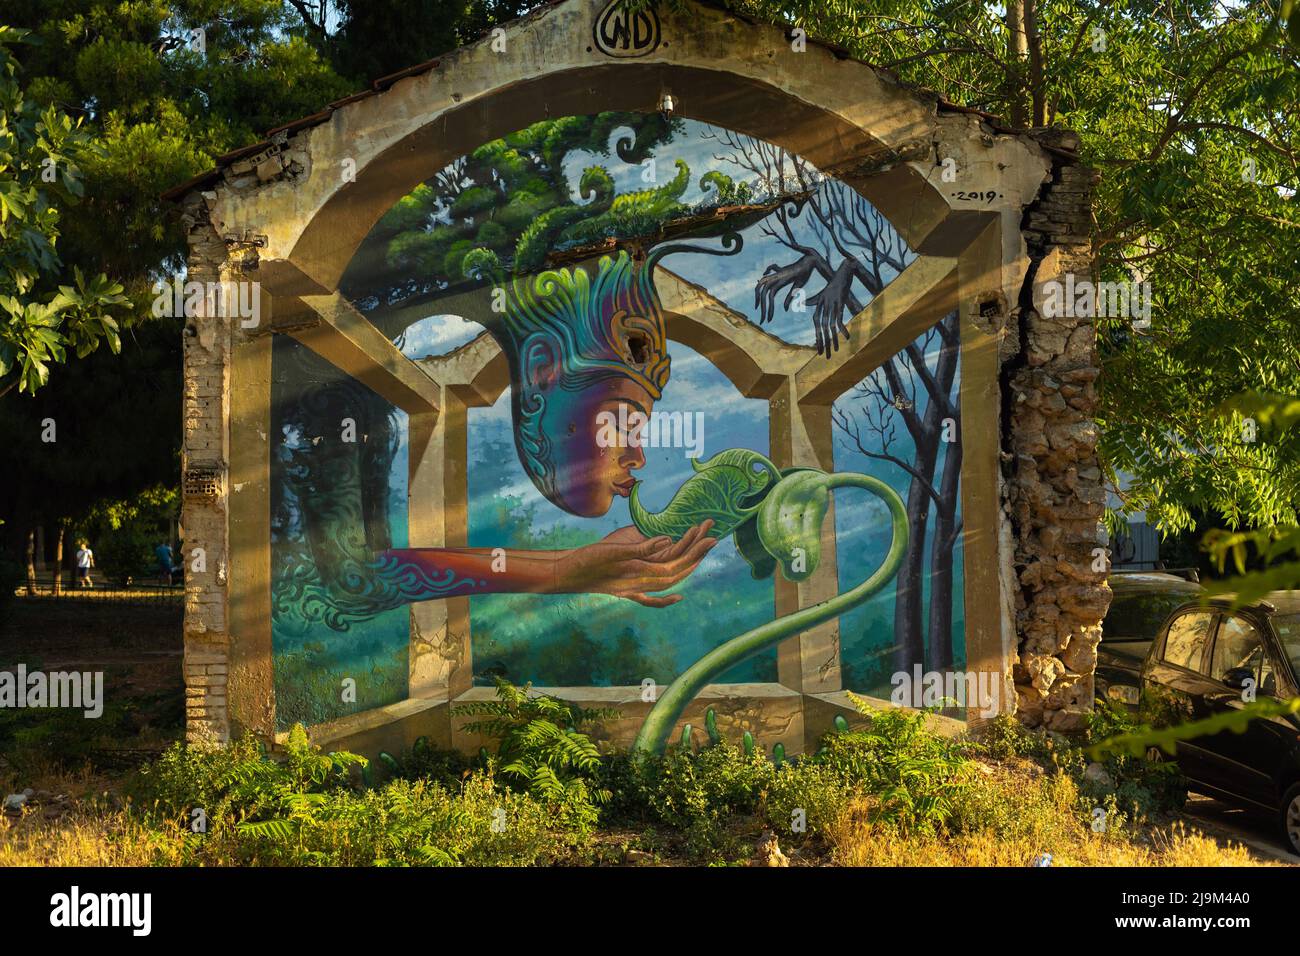 A large mural by ‘Wild drawing’ on a ruin building in Fix park, Athens Stock Photo